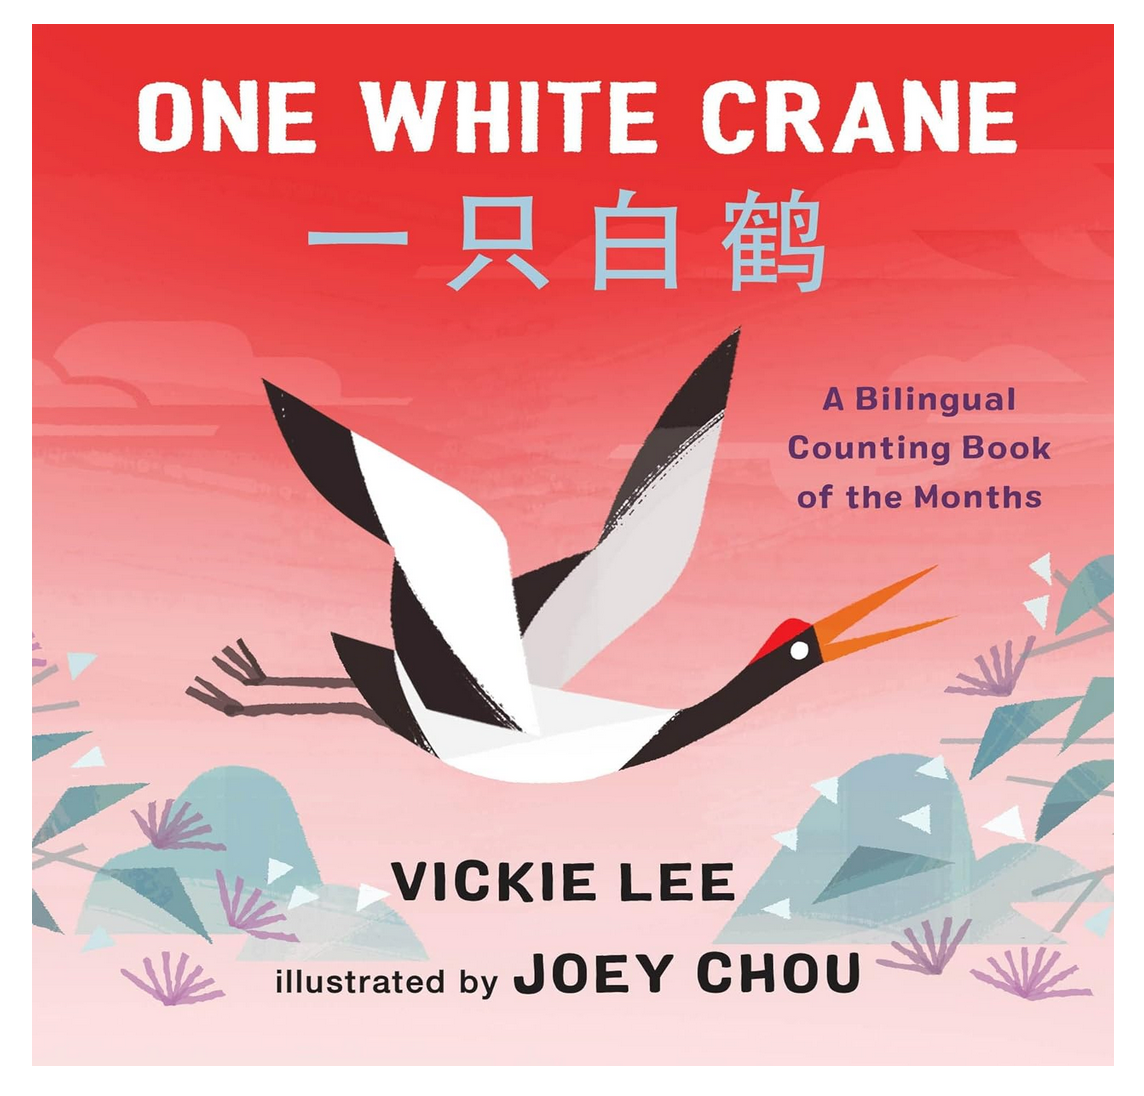 One White Crane: A Bilingual Counting Book of the Months